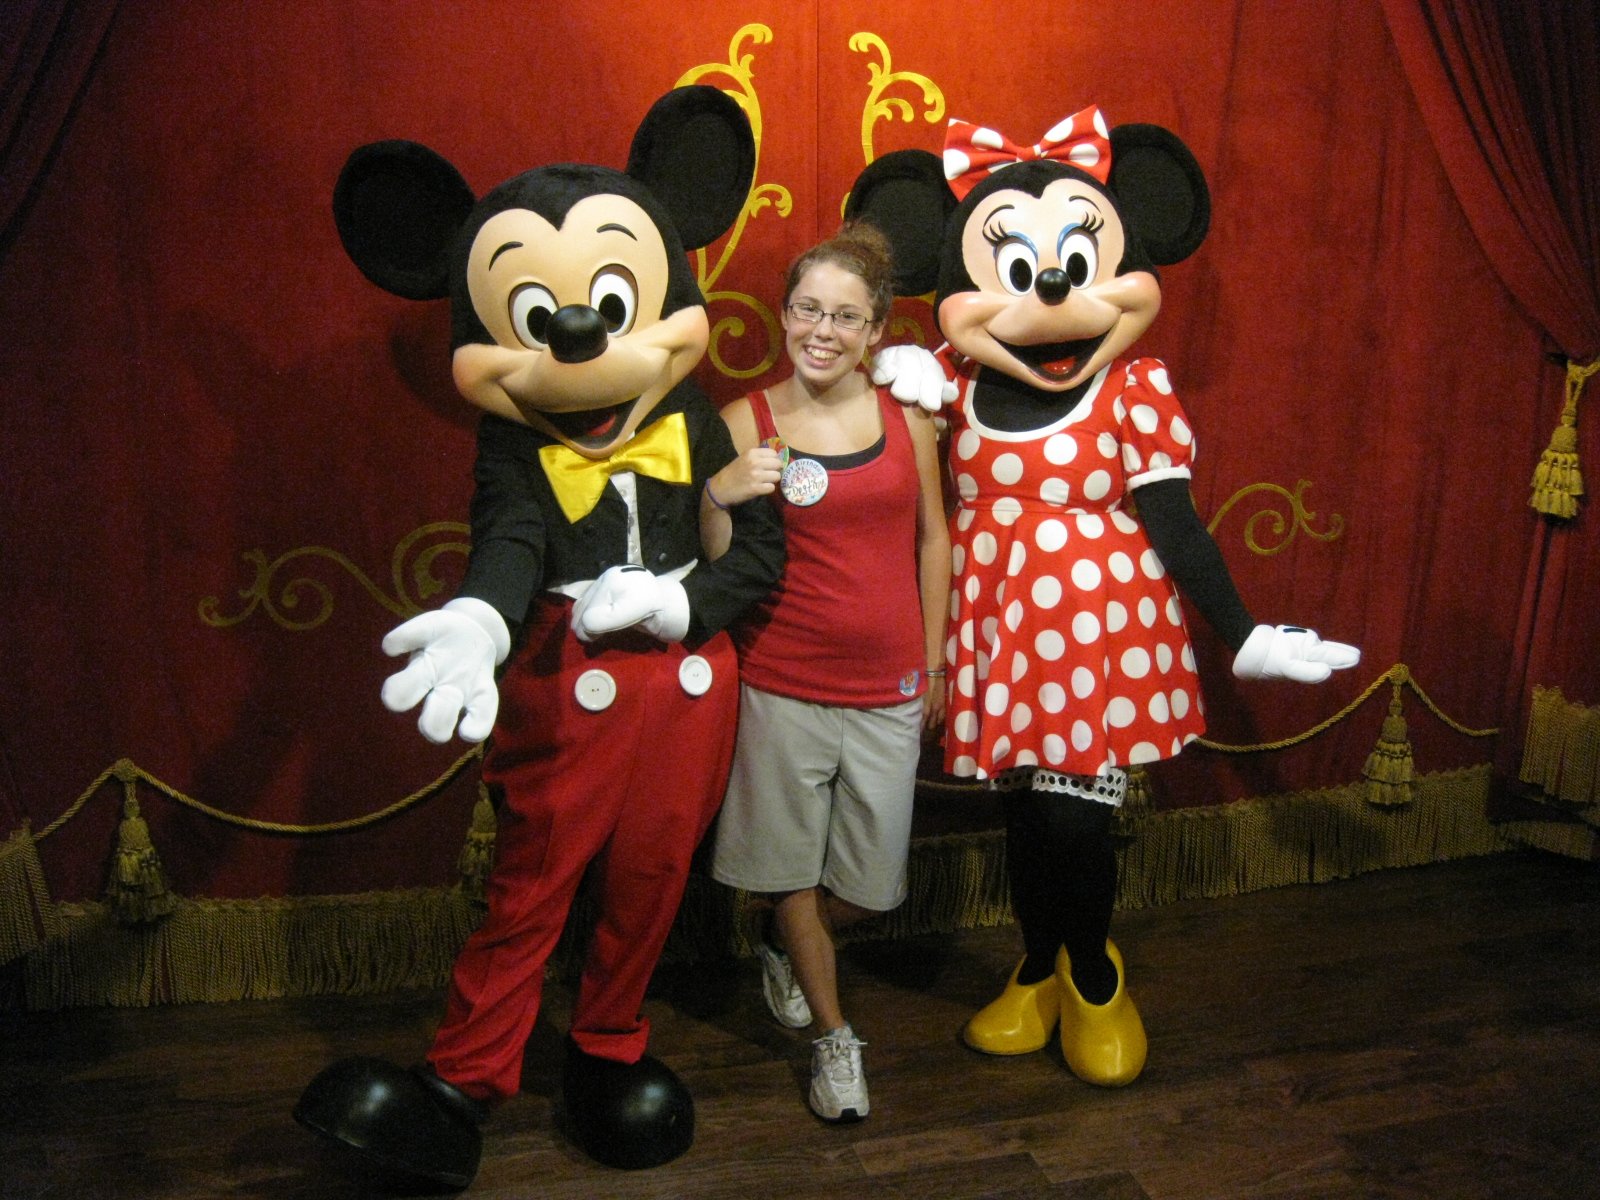 Mickey and Minnie at Town Square Theater in Magic Kingdom 2011